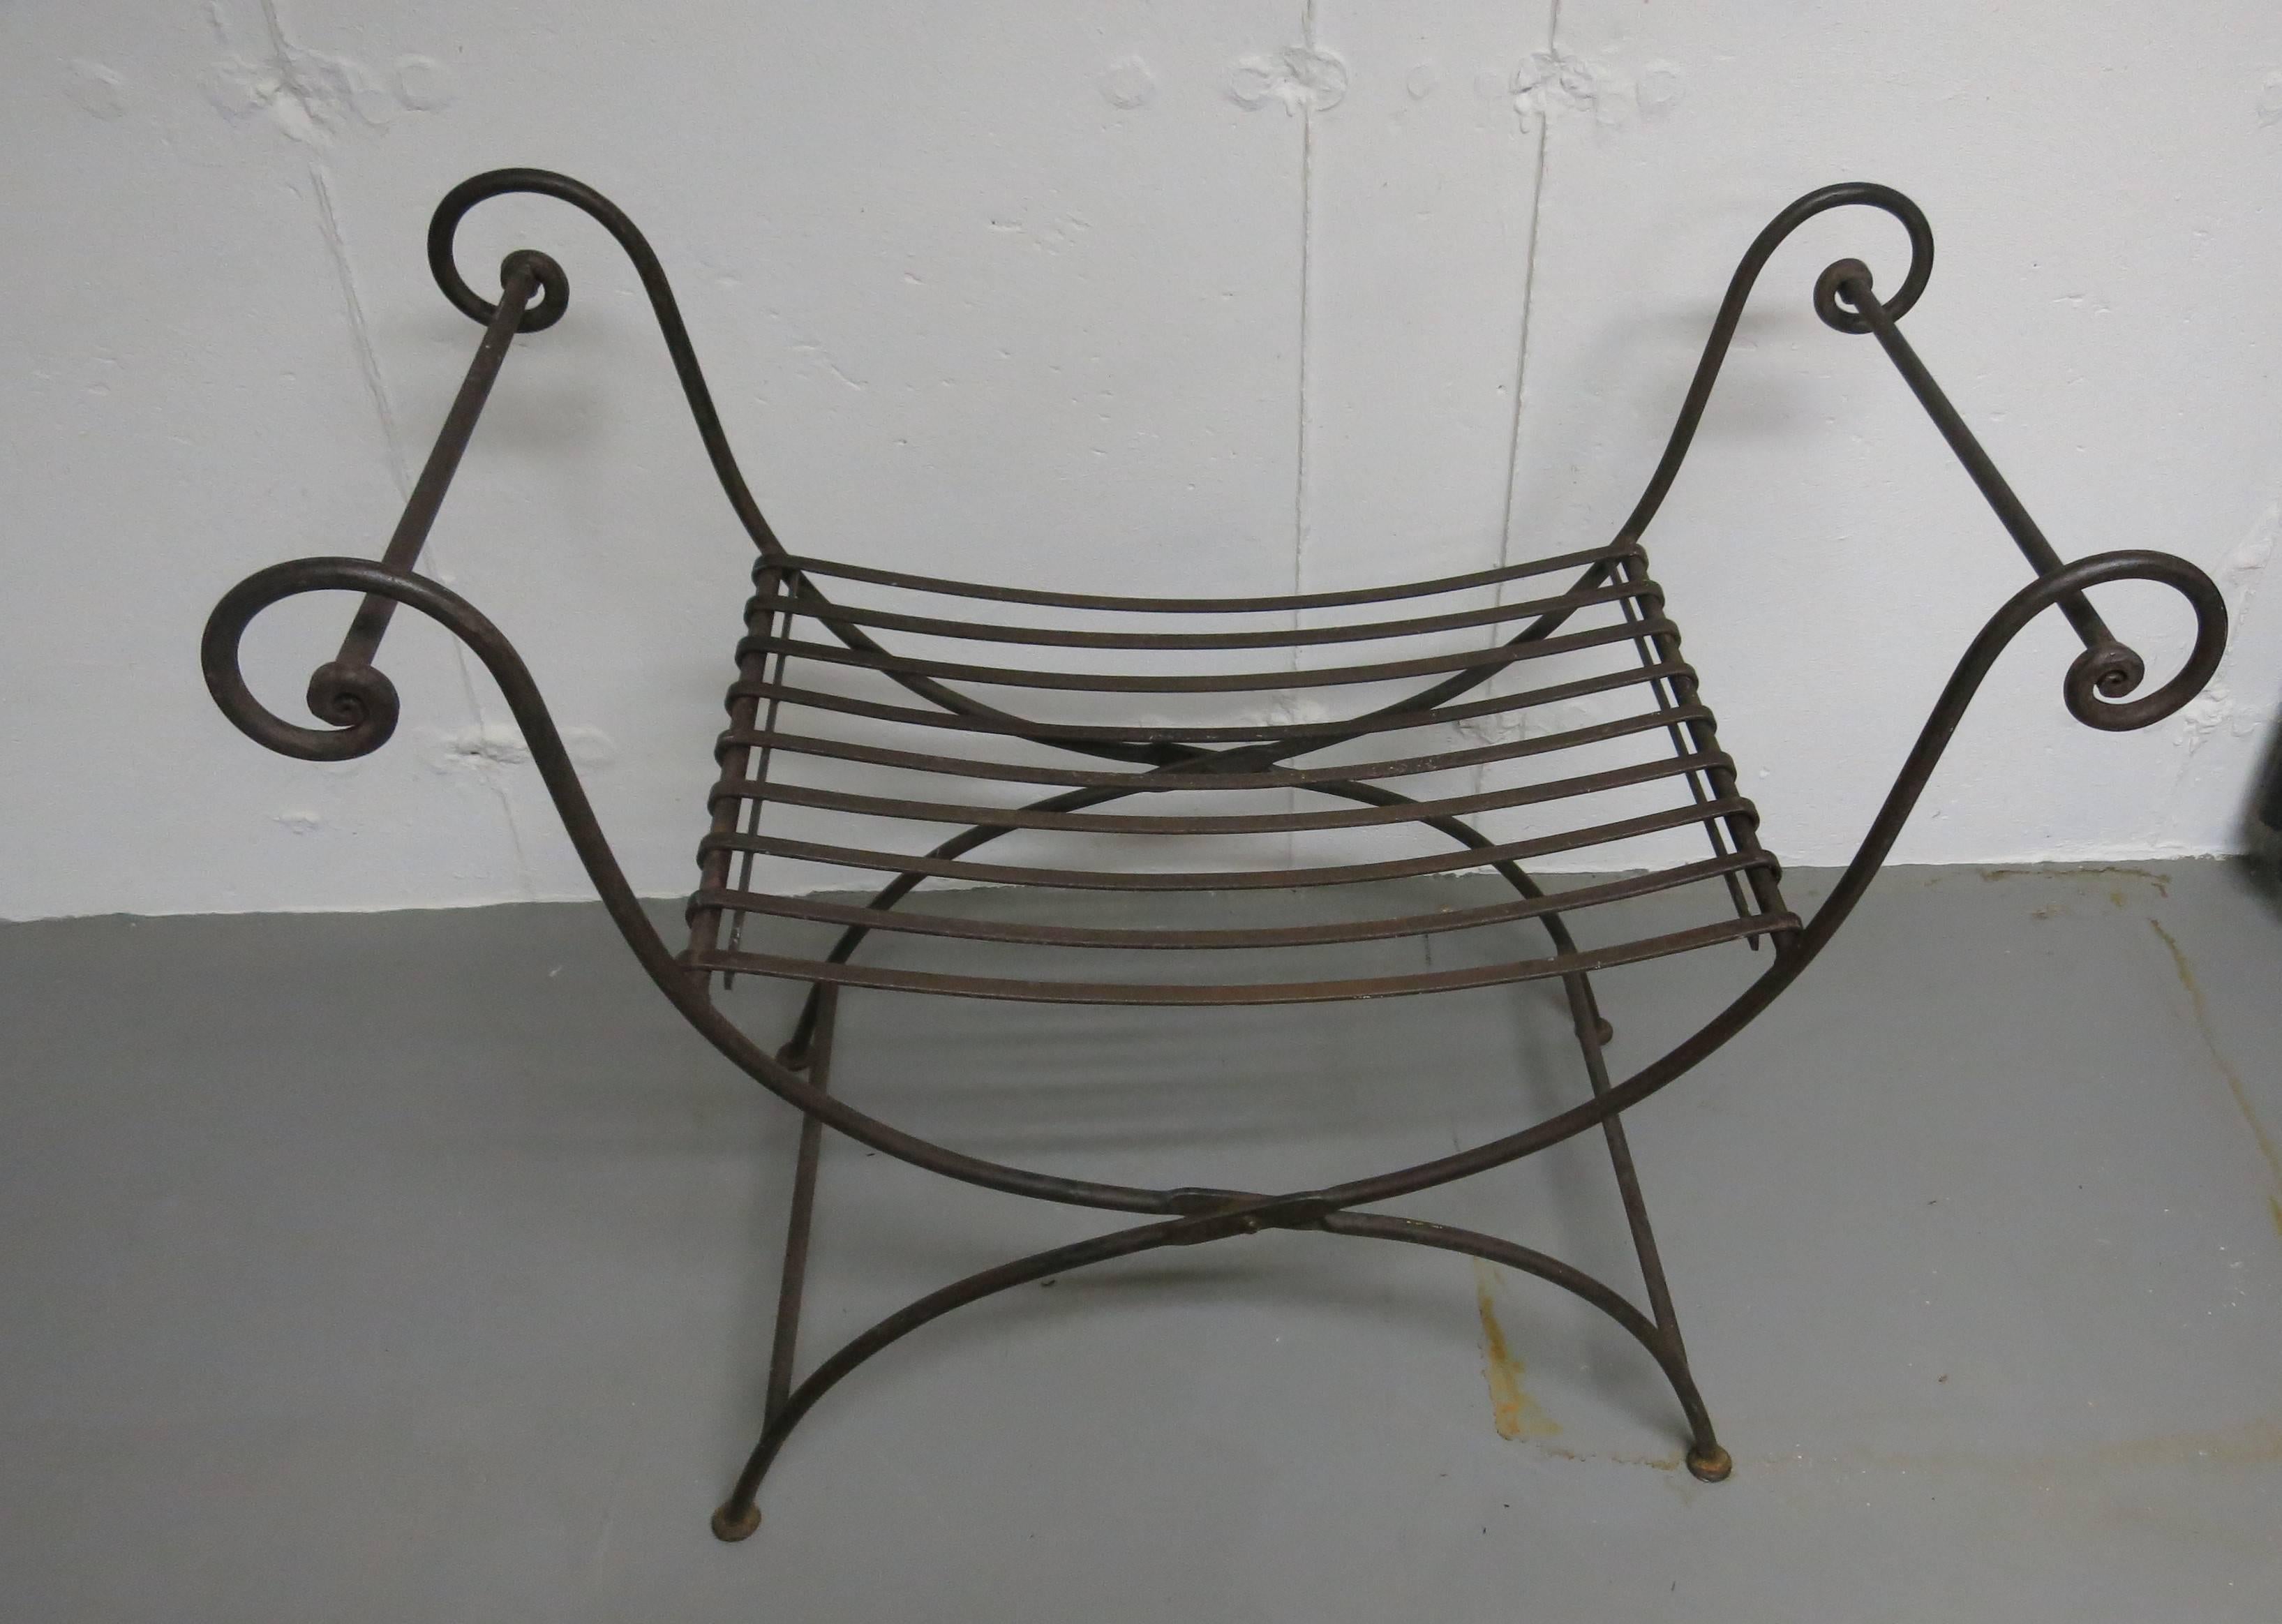 Vintage iron folding bench nicely rusted. It is 33.5